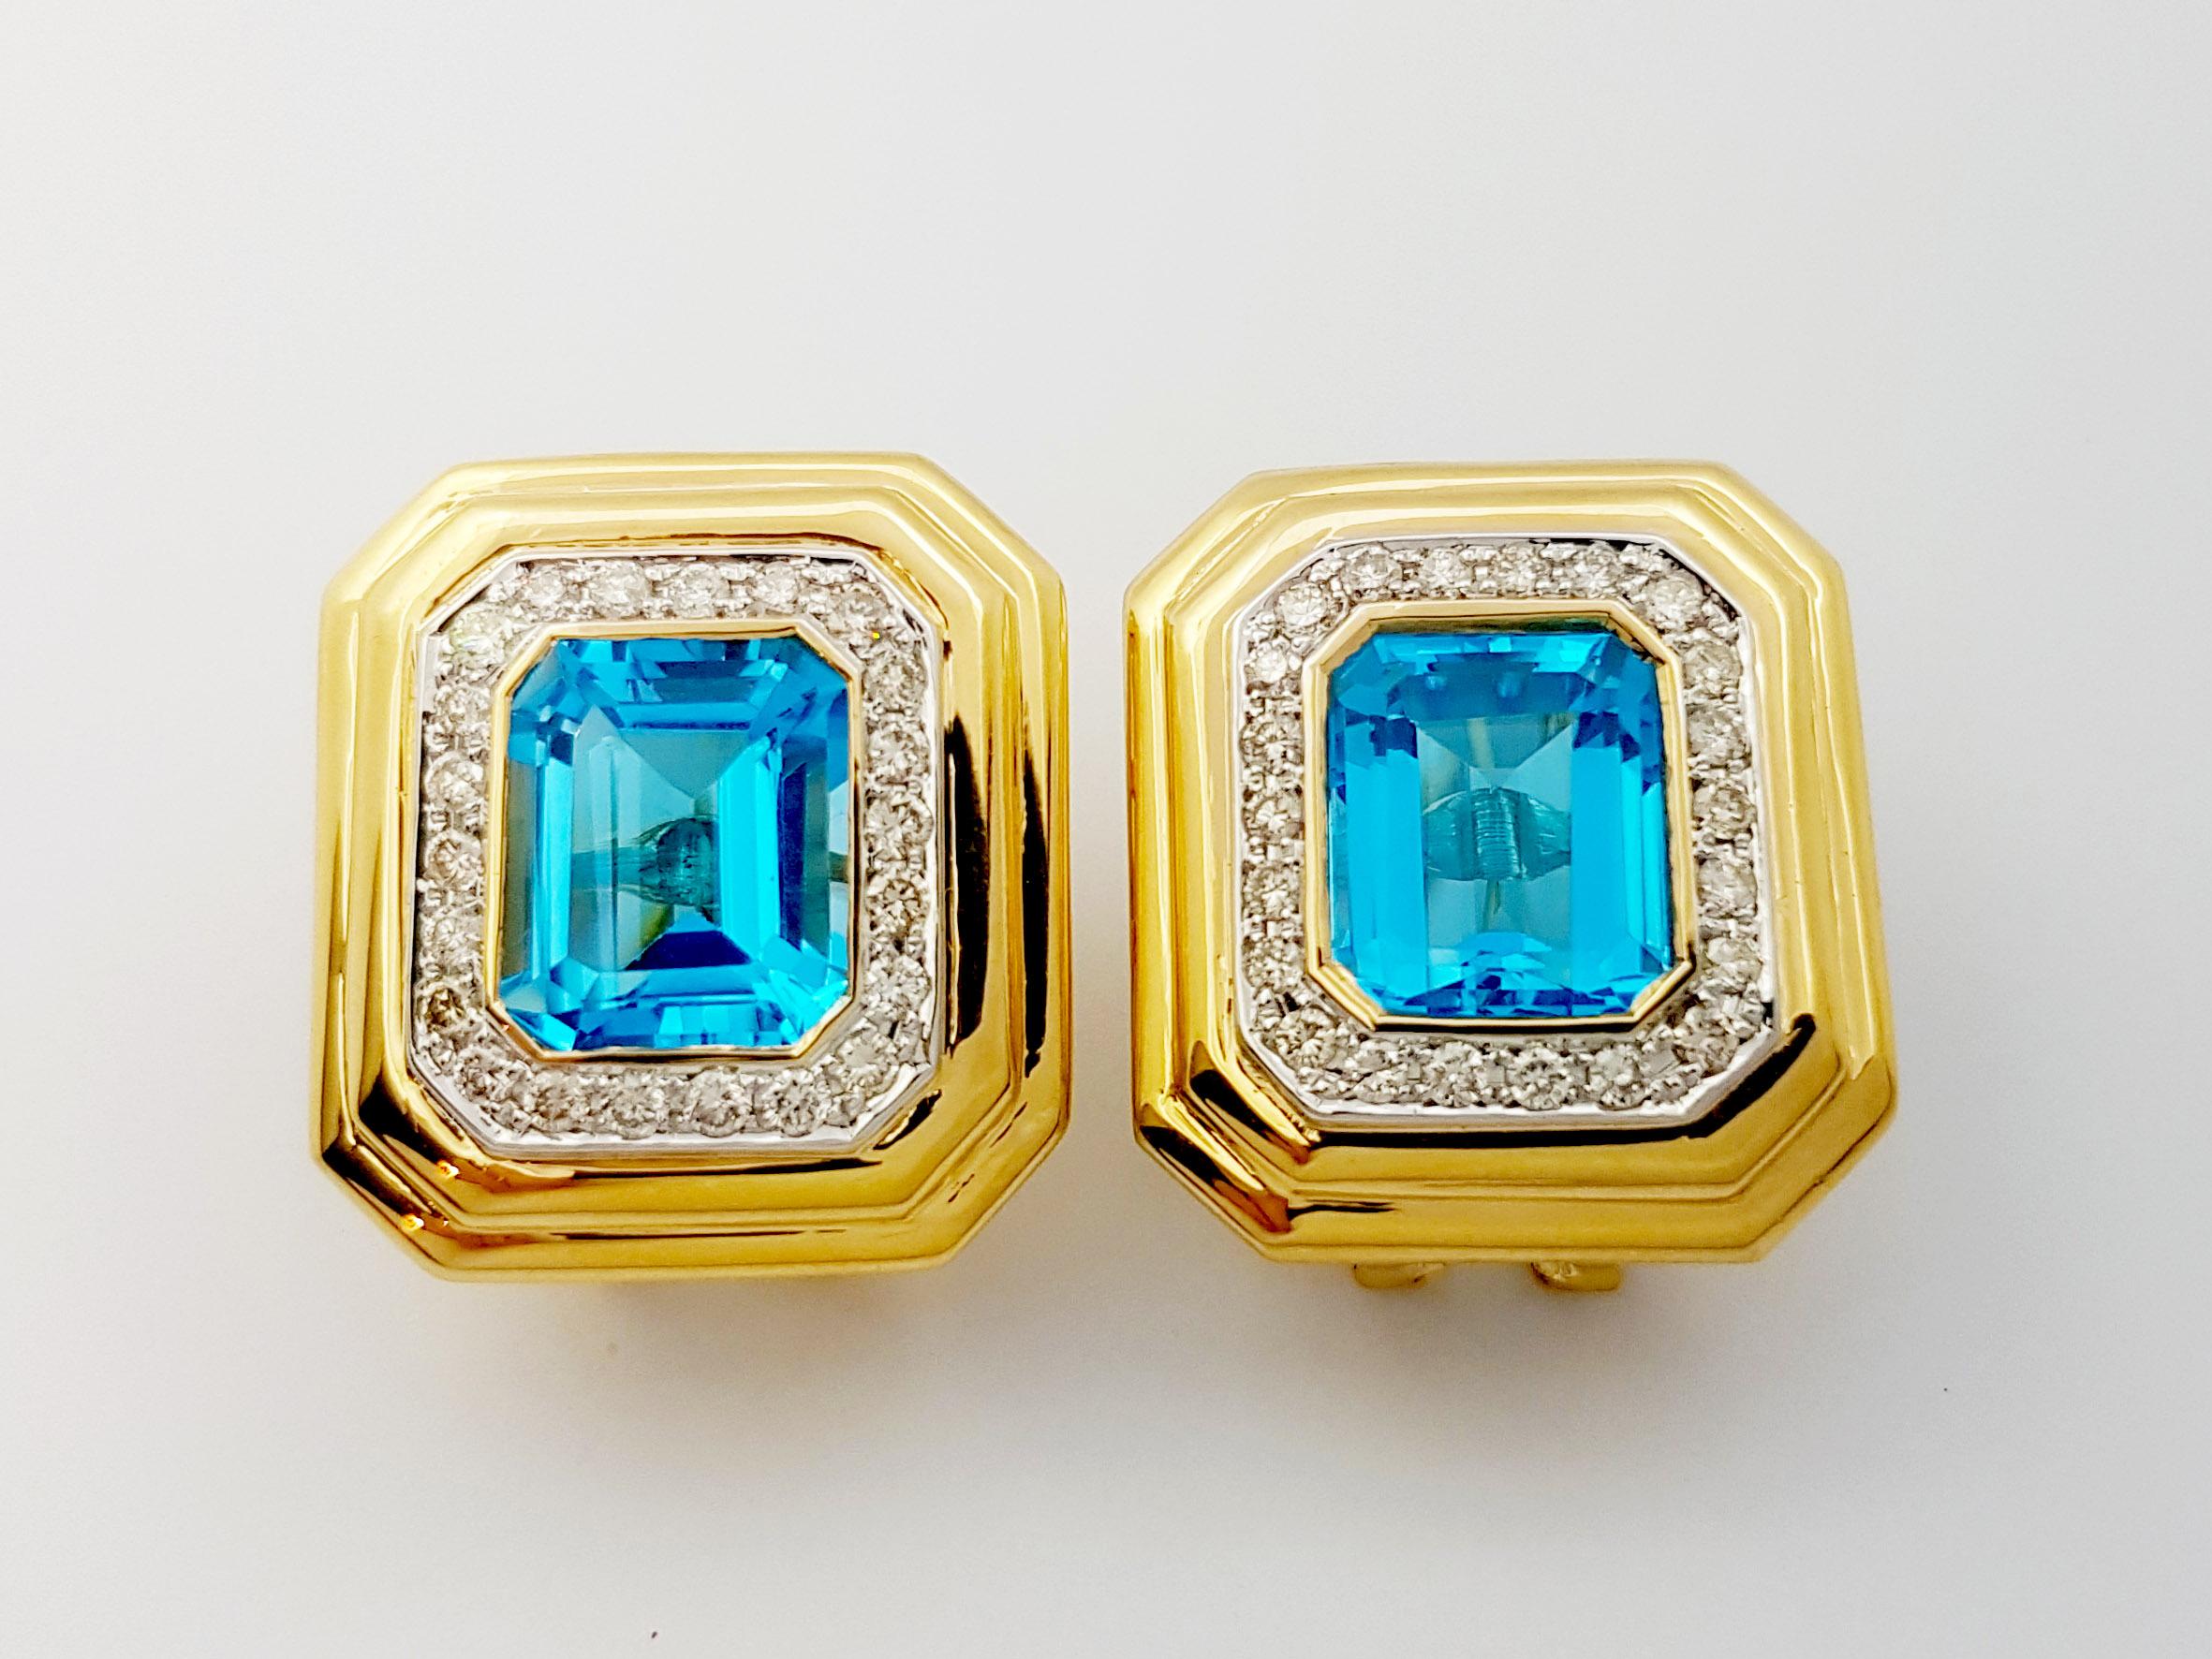 Blue Topaz 15.28 carats with Diamond 1.28 carats Earrings set in 14K Gold Settings

Width: 2.2 cm 
Length: 2.6 cm
Total Weight: 25.10 grams

